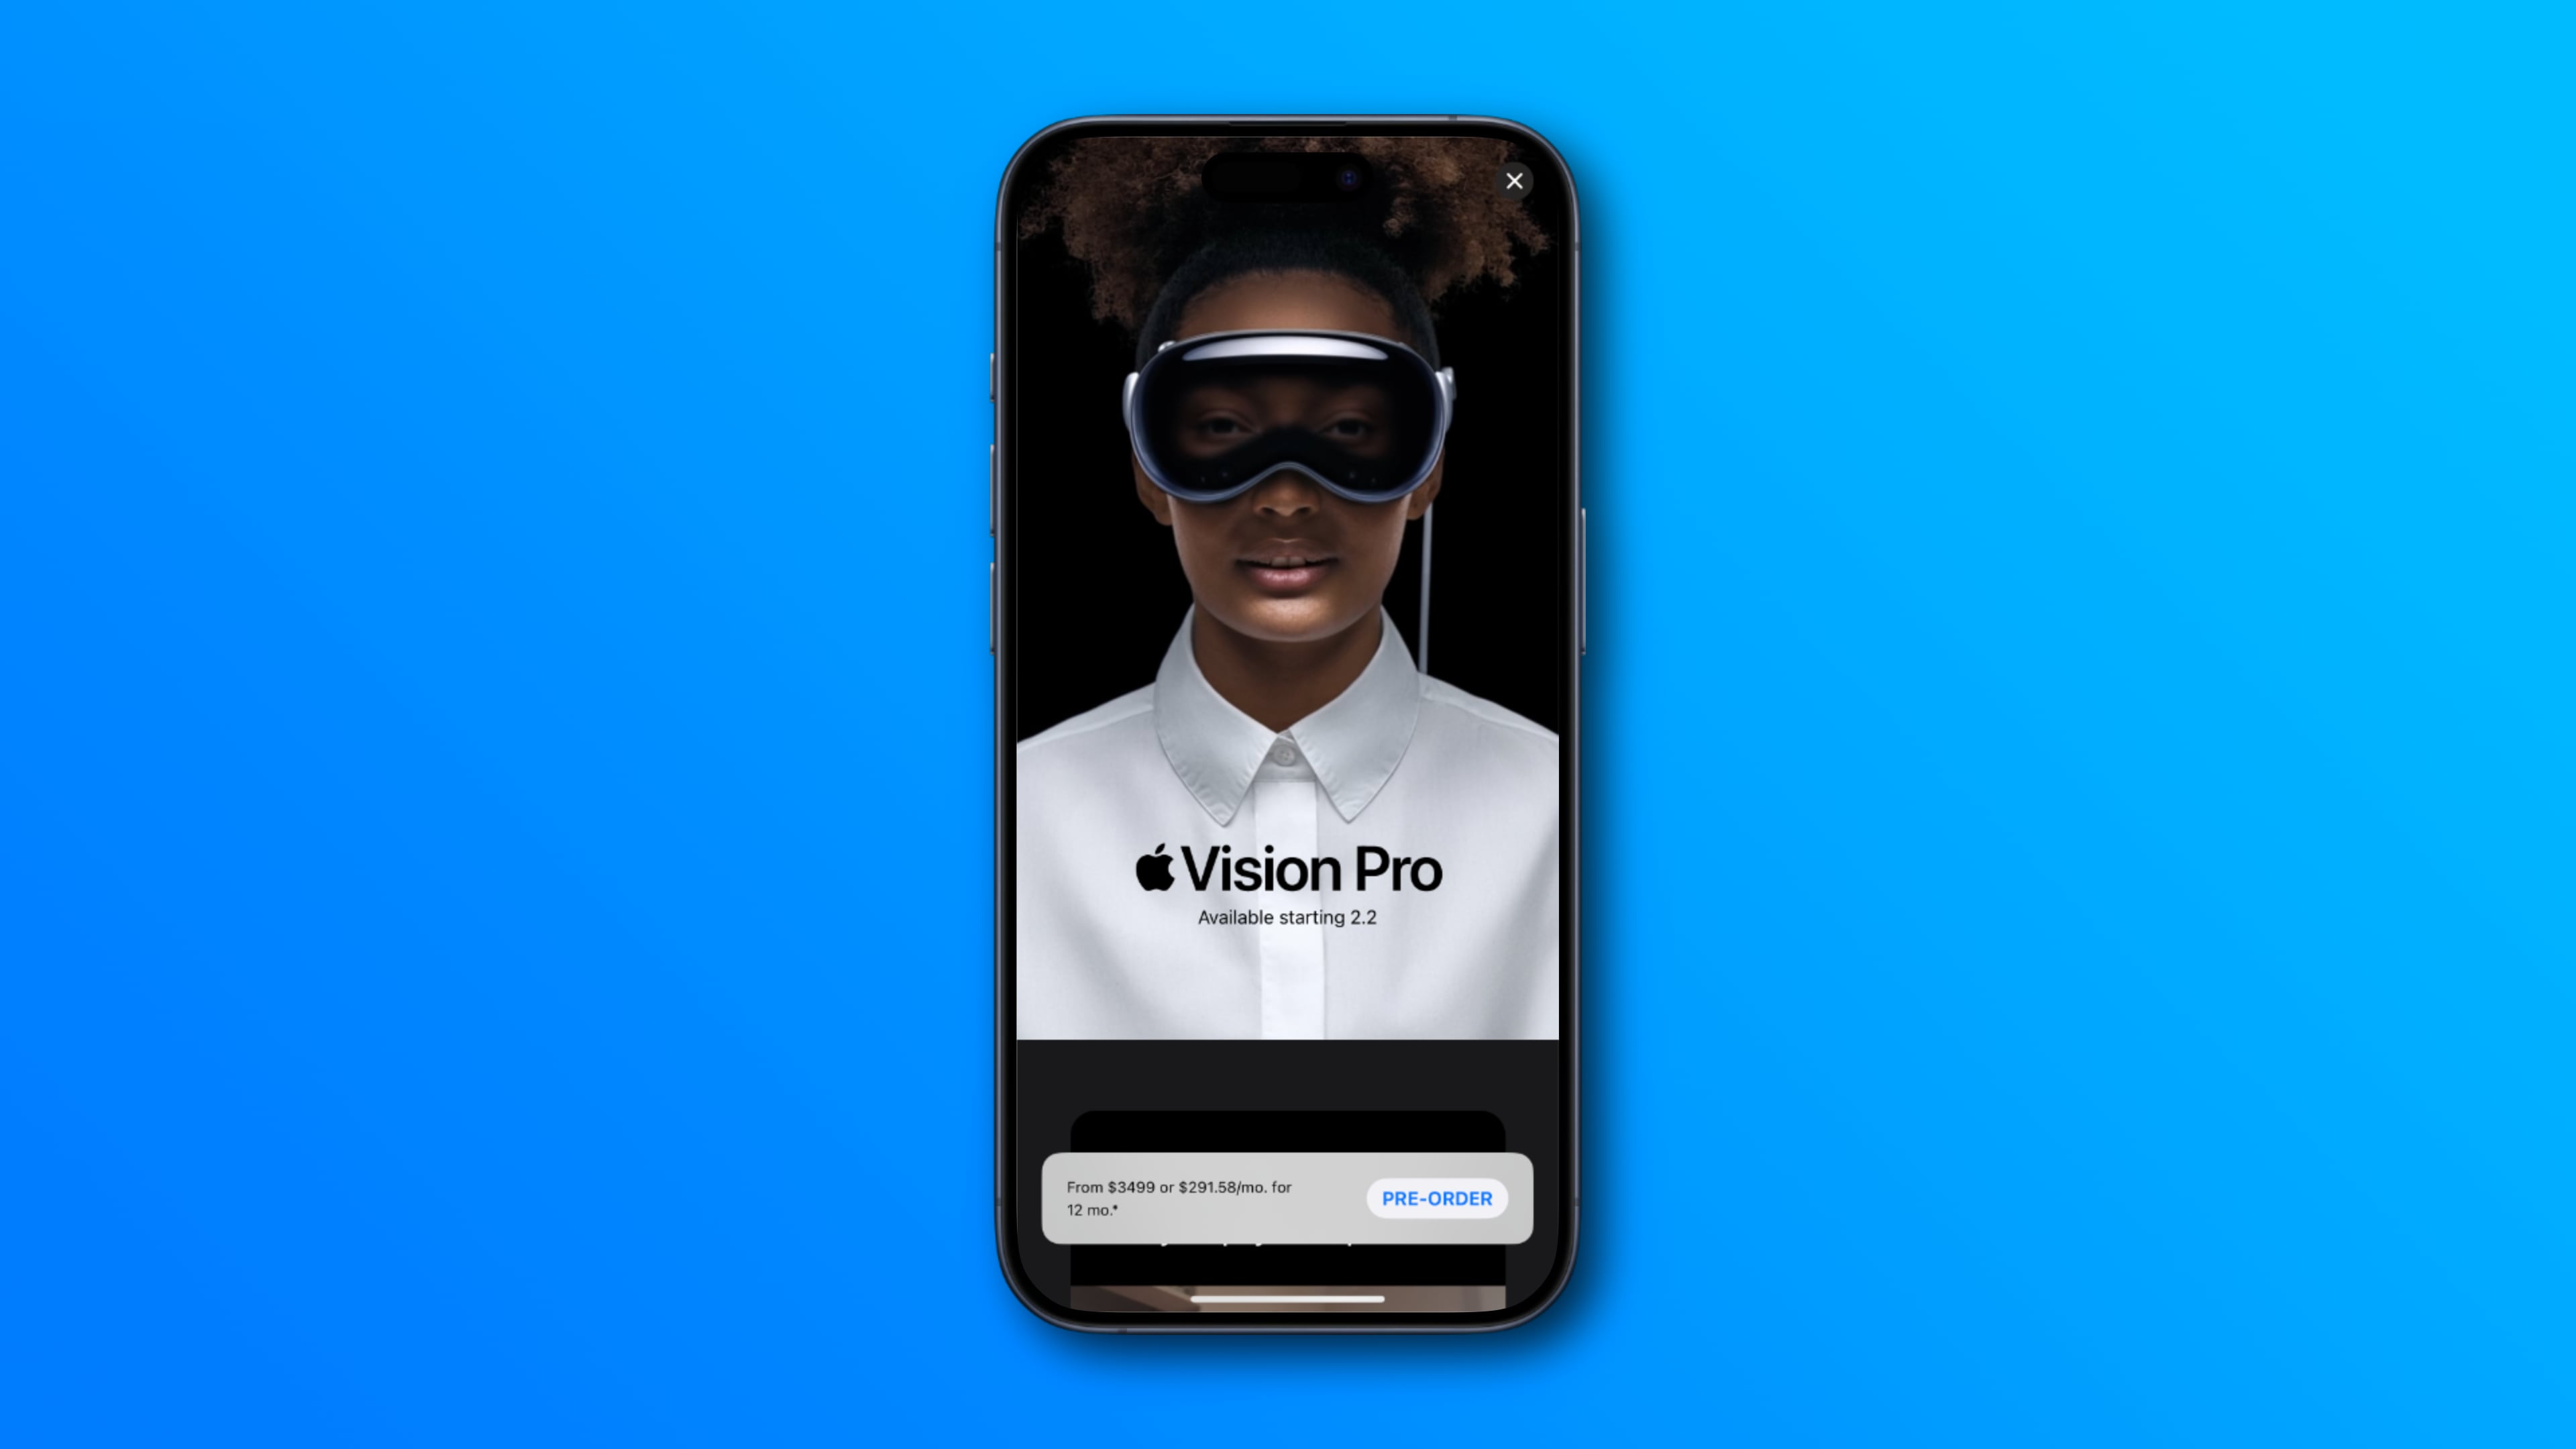 Vision Pro pre-order guide: Storage options, AppleCare+ and more